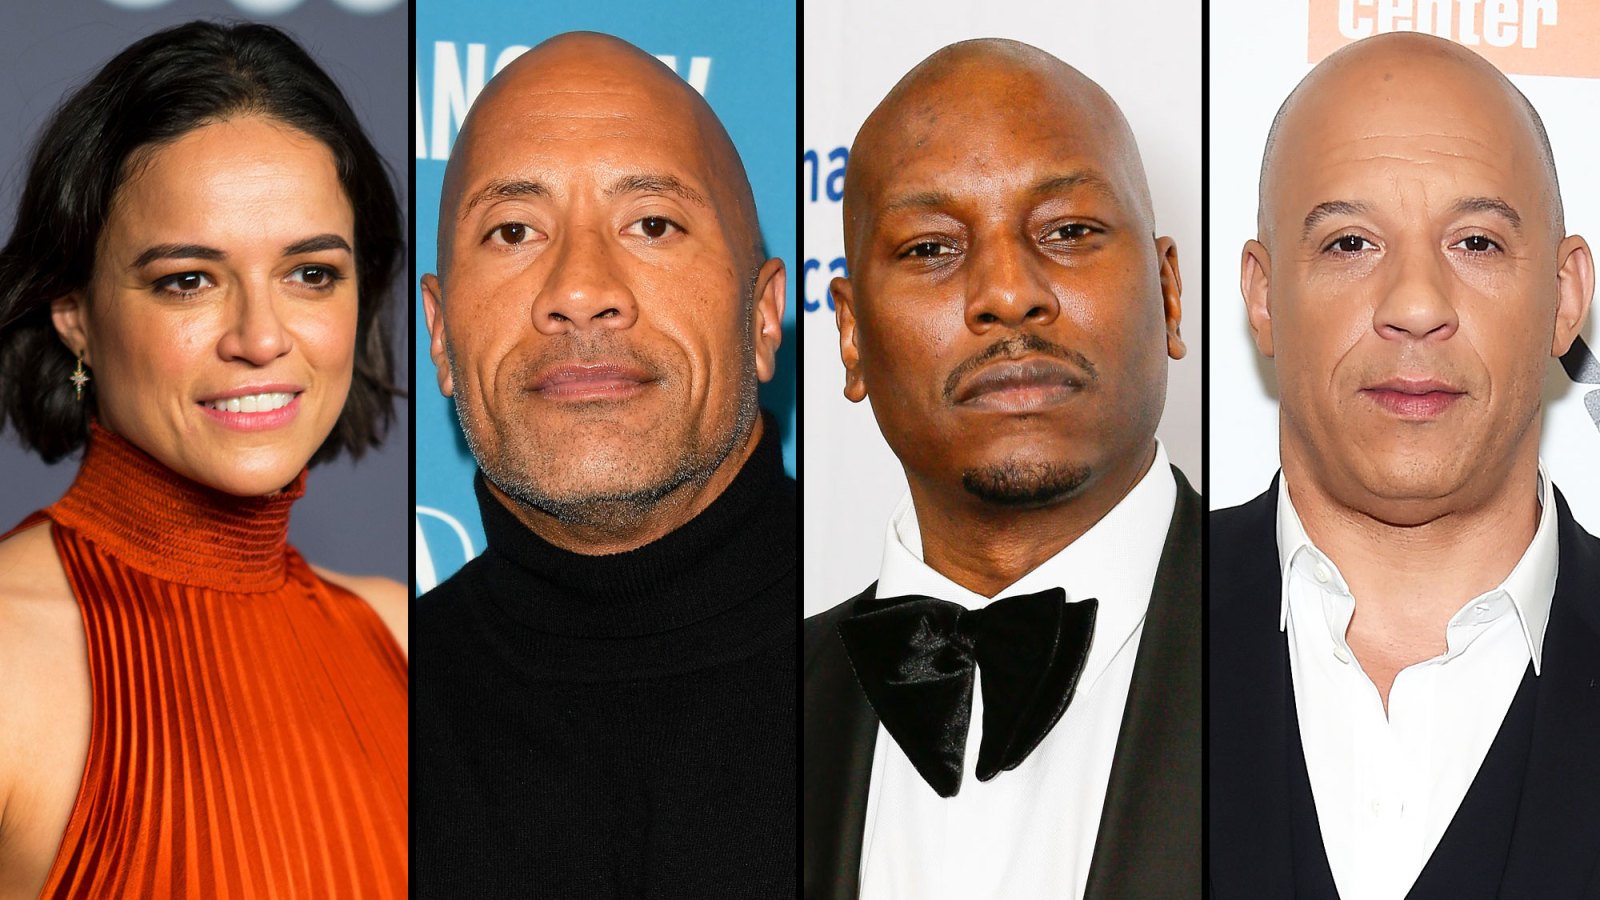 Michelle Rodriguez, Dwayne Johnson, Tyrese Gibson, and Vin Diesel